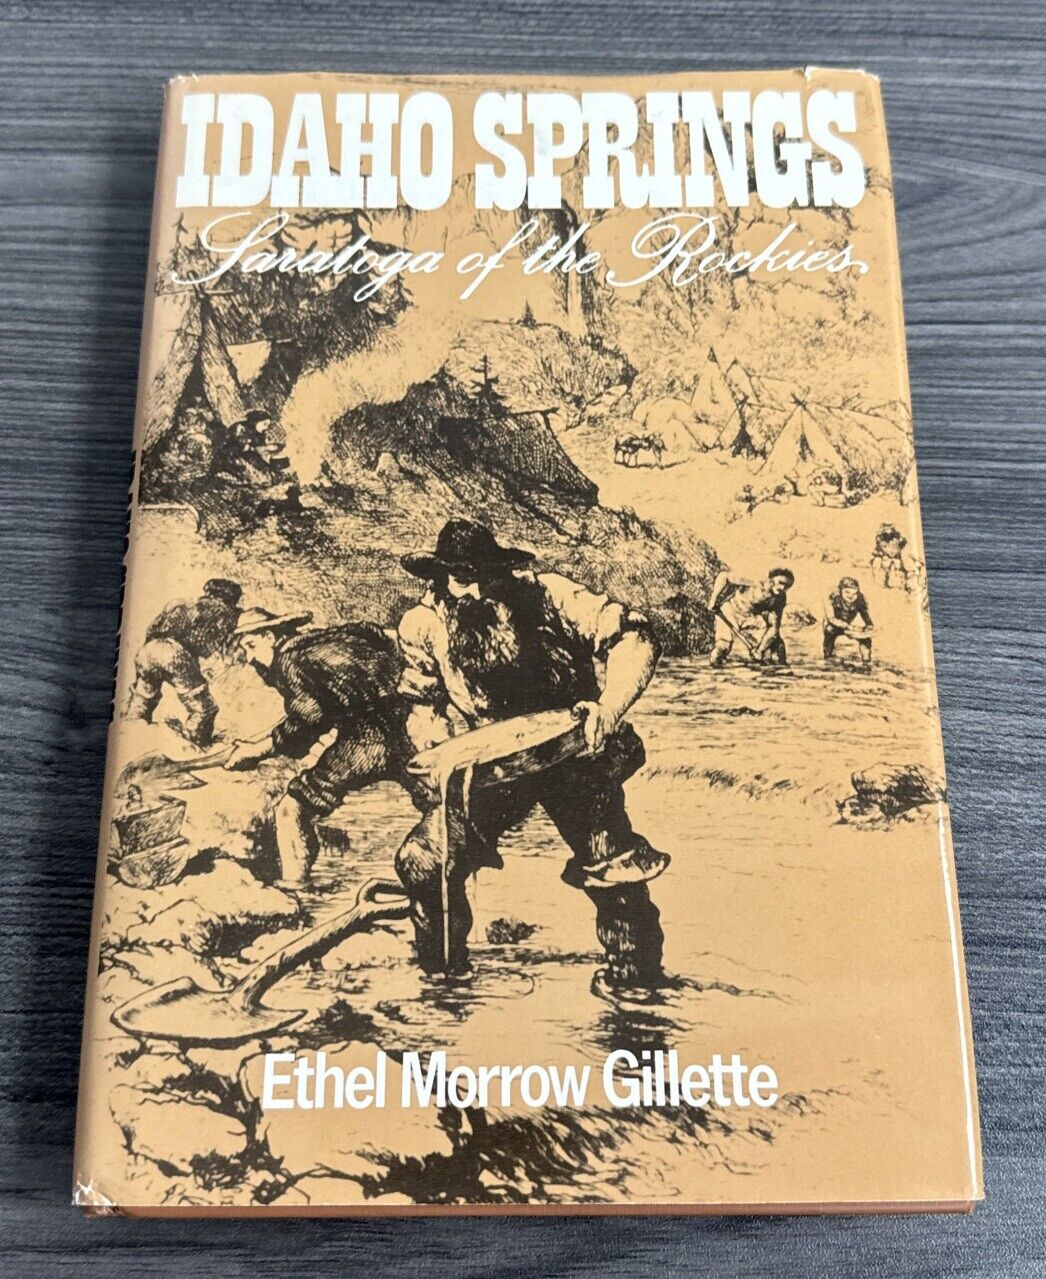 Idaho Springs - Saratoga of the Rockies by Ethel Morrow Gillette FIRST EDITION